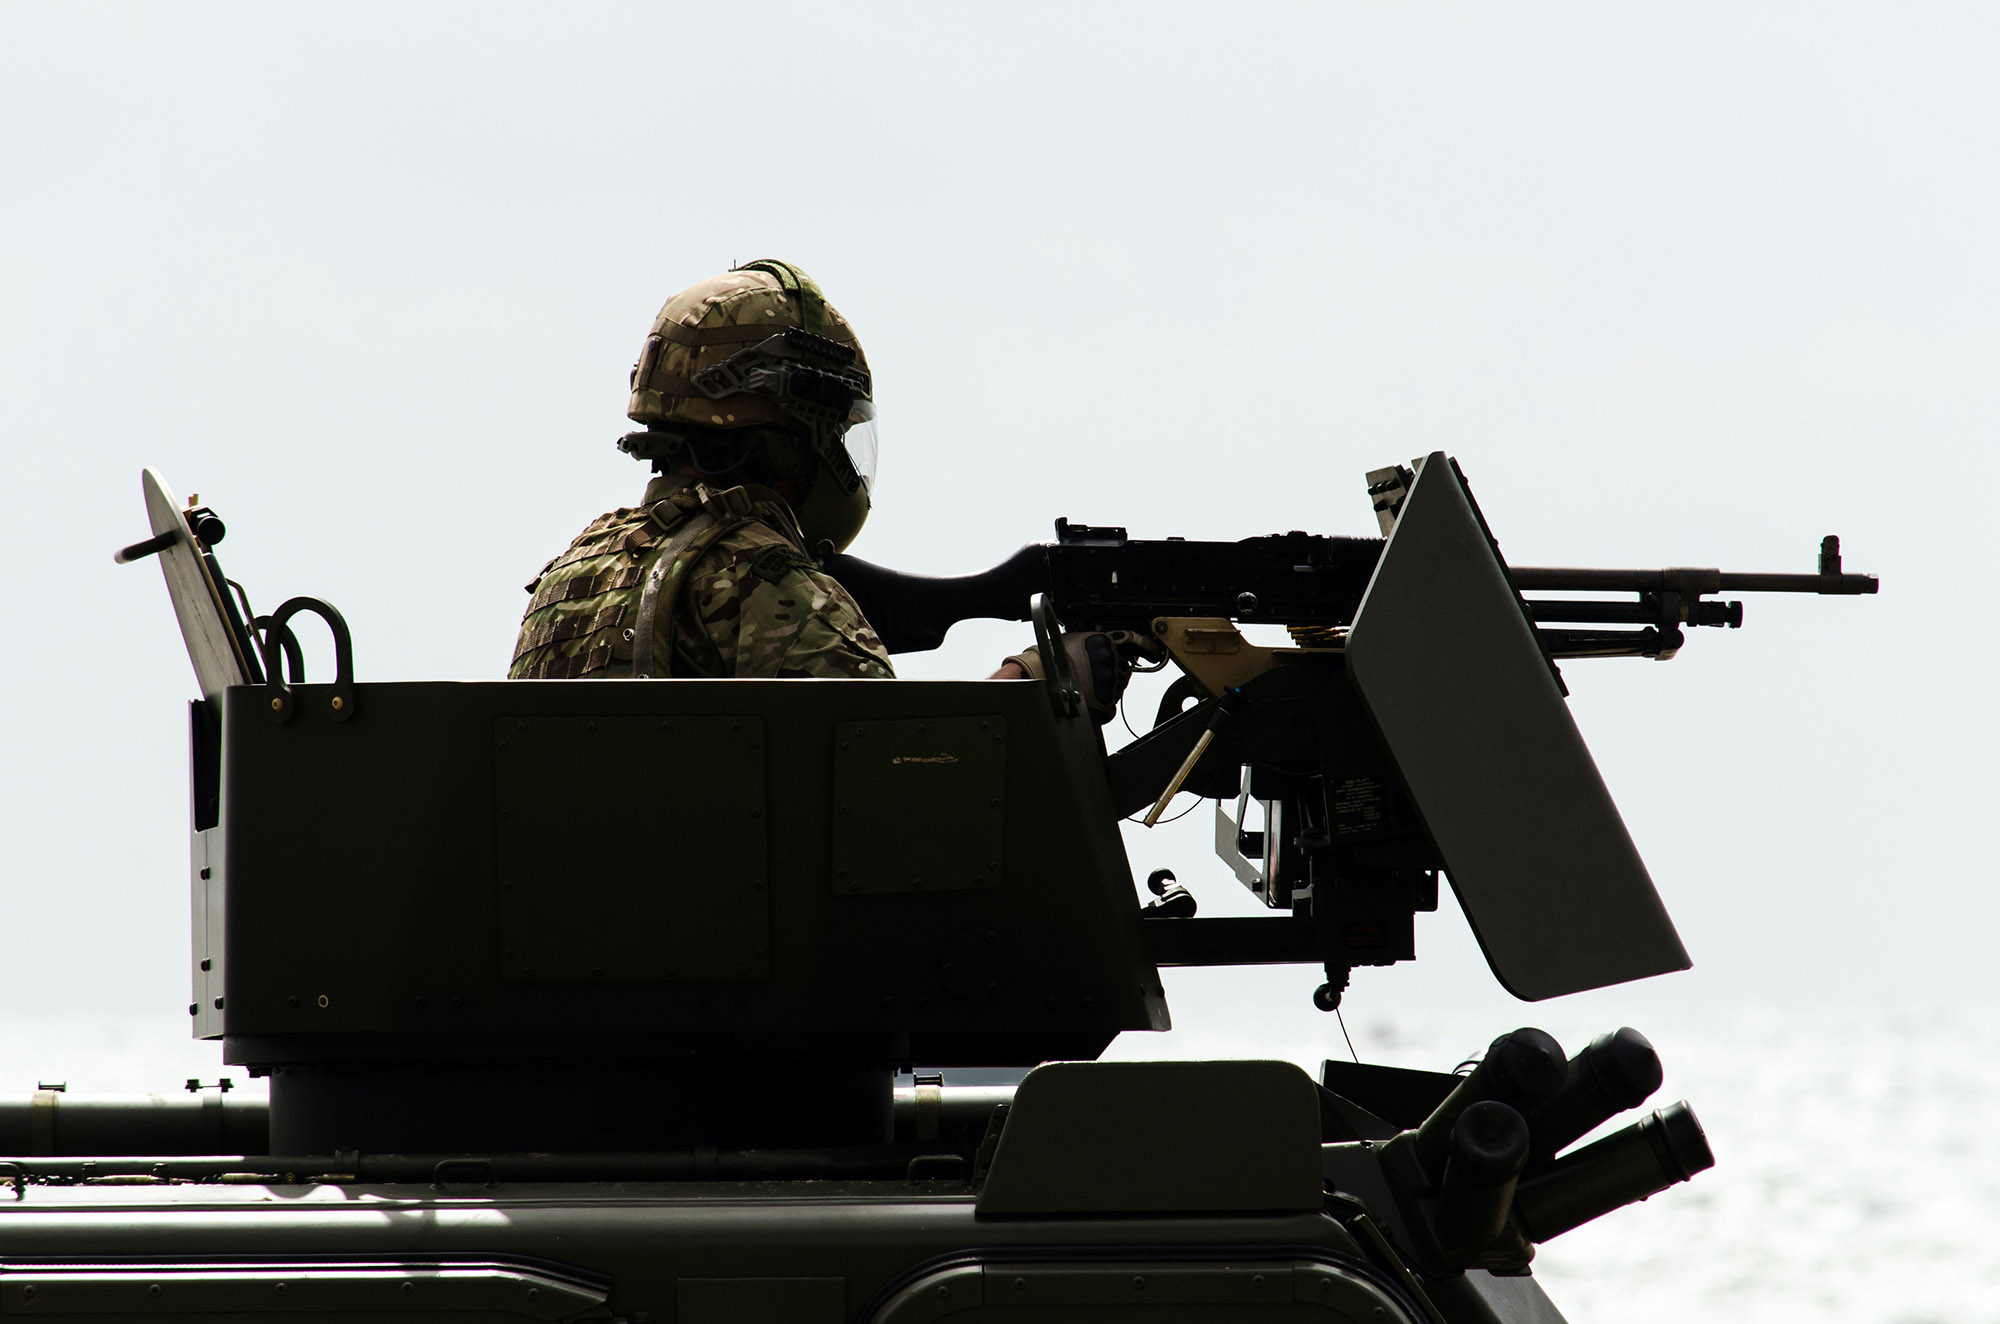 british army personal injury claim solicitors Cardiff